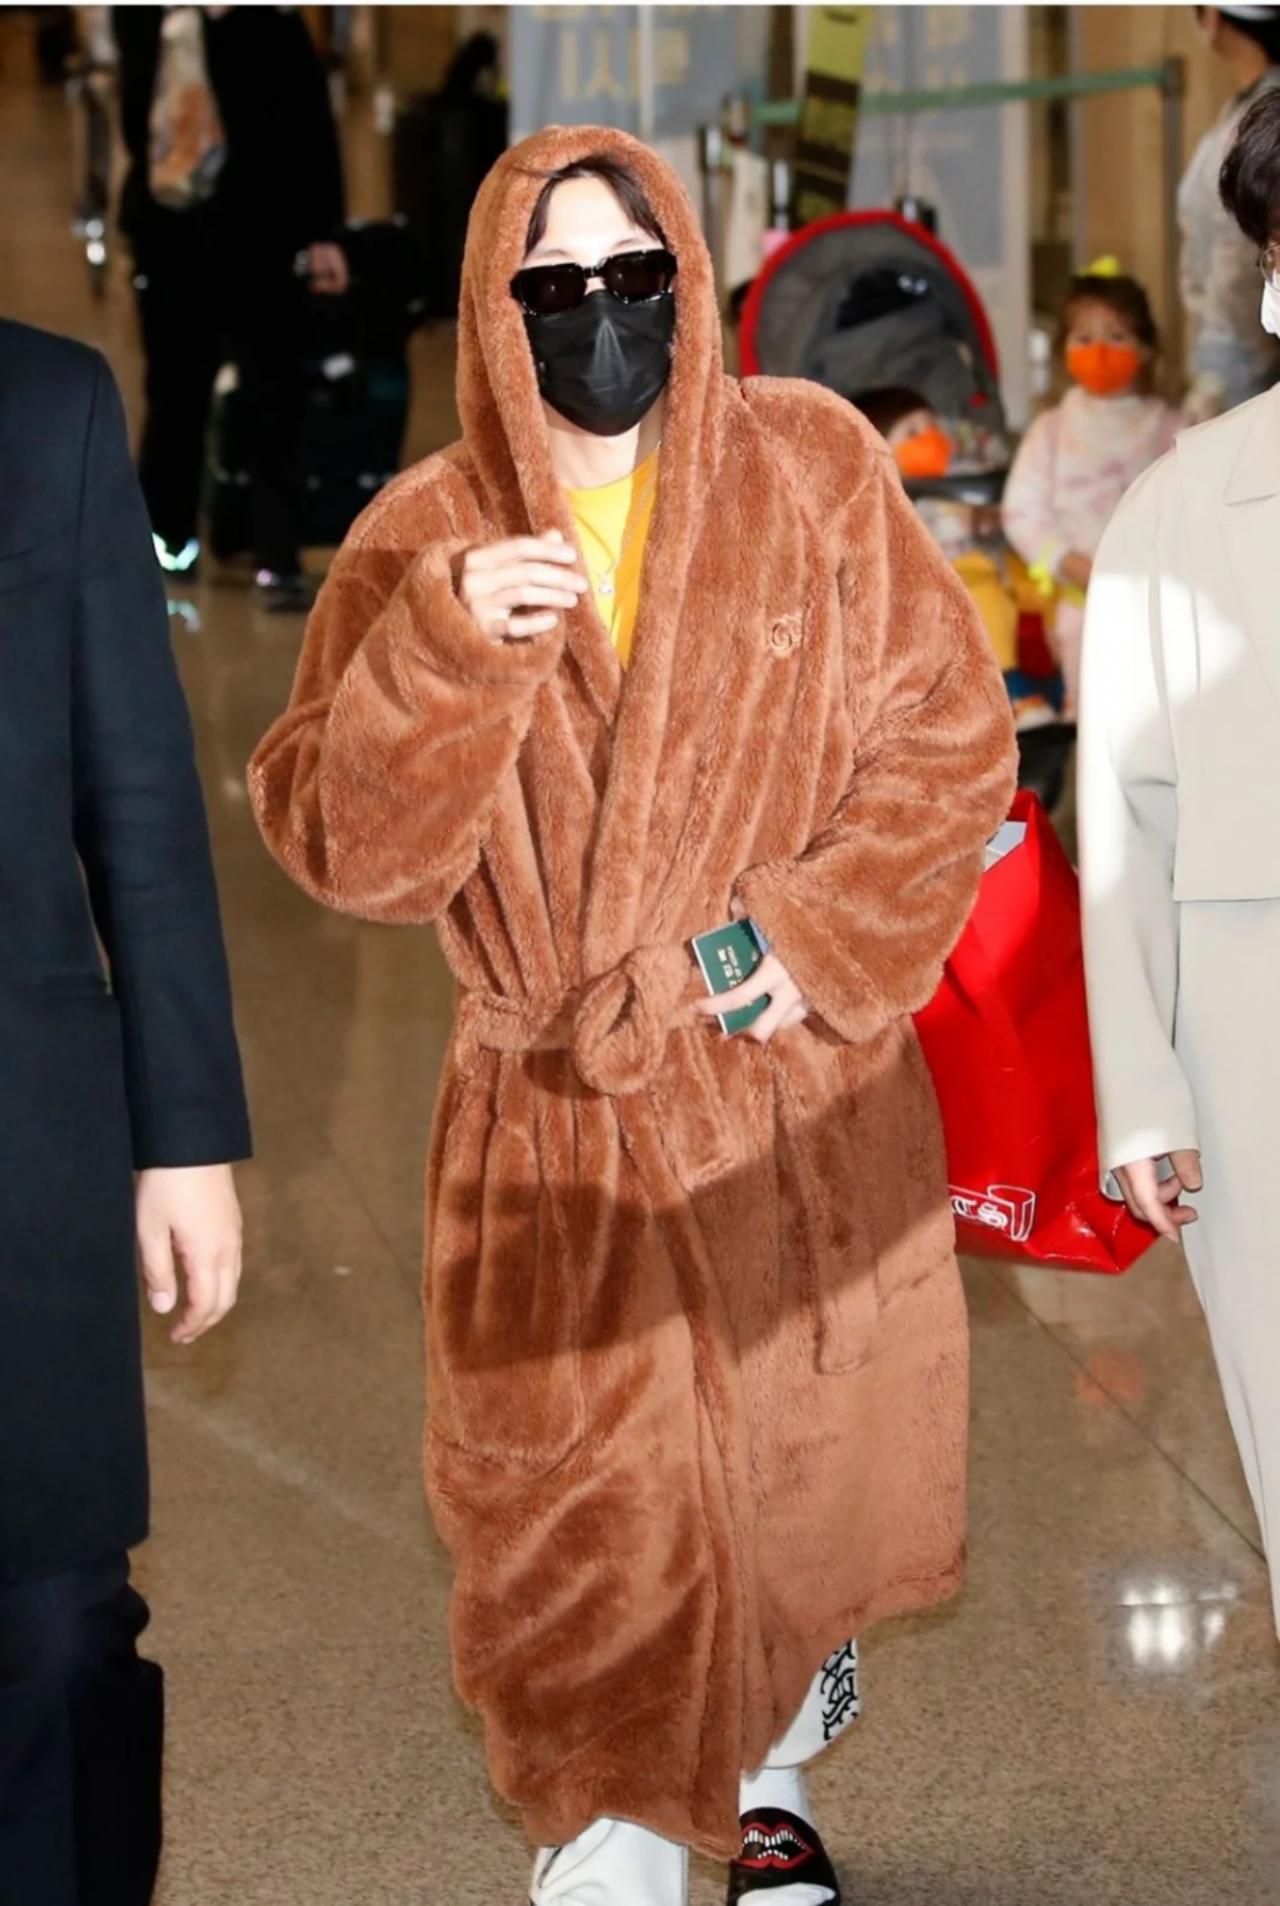 J-Hope is known for pulling some rather bizarre and eccentric fashion choices. A bathrobe? Seriously Hobi? And how does he manage to look good even in this? We just had a flashback to that Run! BTS episode where he was forced to dress up in a ridiculous all-pink ensemble - but still rocked the ramp!